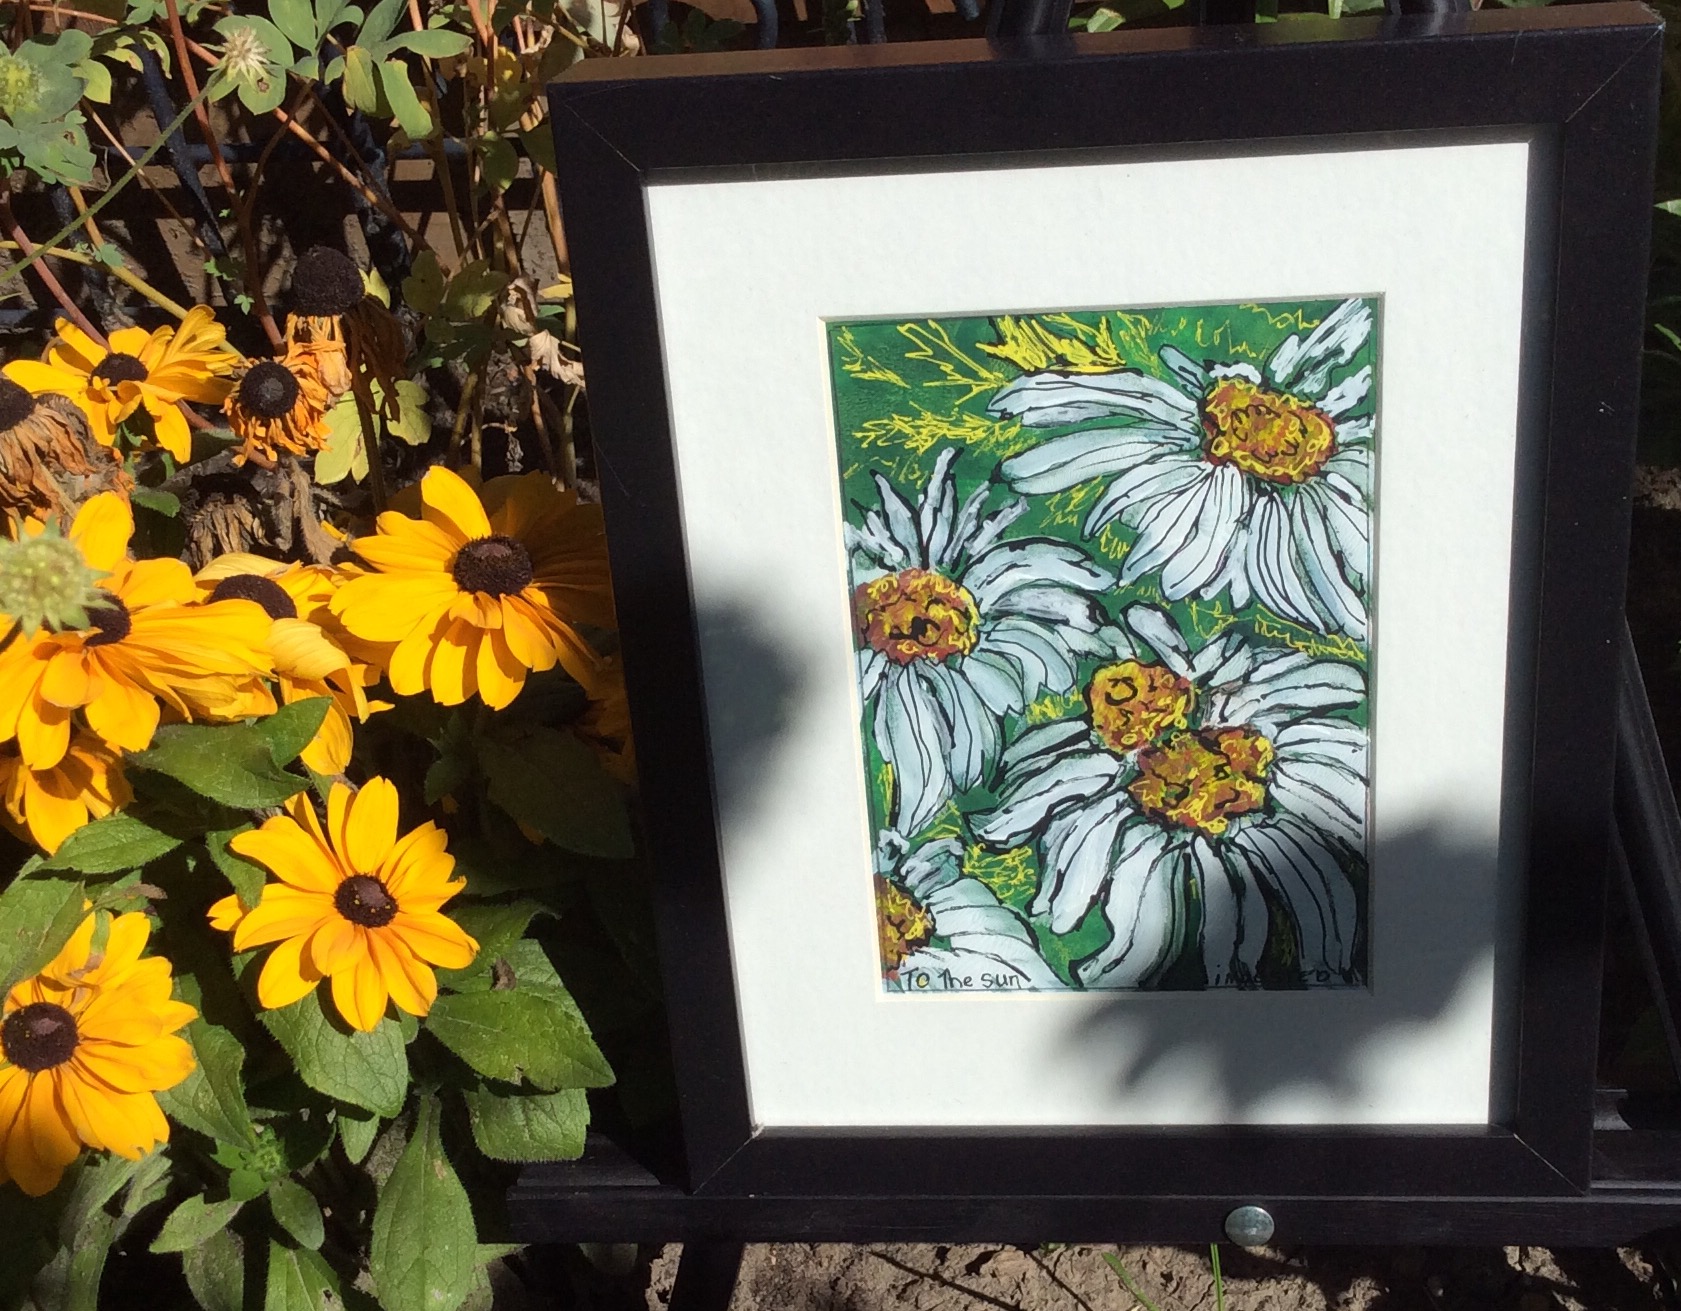 Artists and Authors at Art in the Garden, Sept. 18